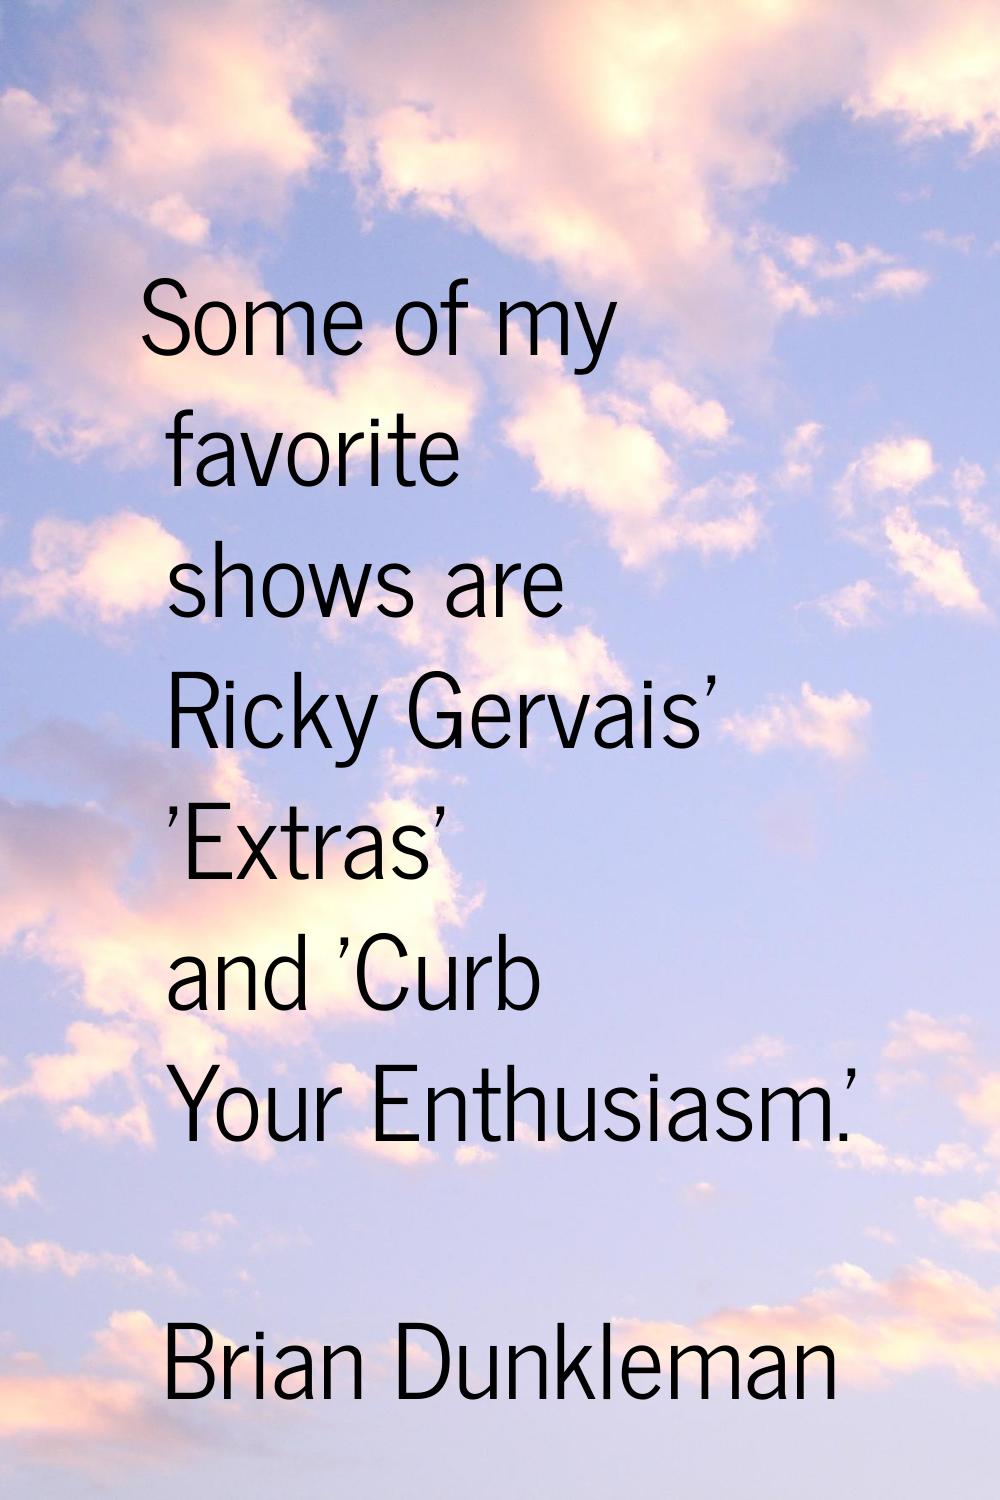 Some of my favorite shows are Ricky Gervais' 'Extras' and 'Curb Your Enthusiasm.'